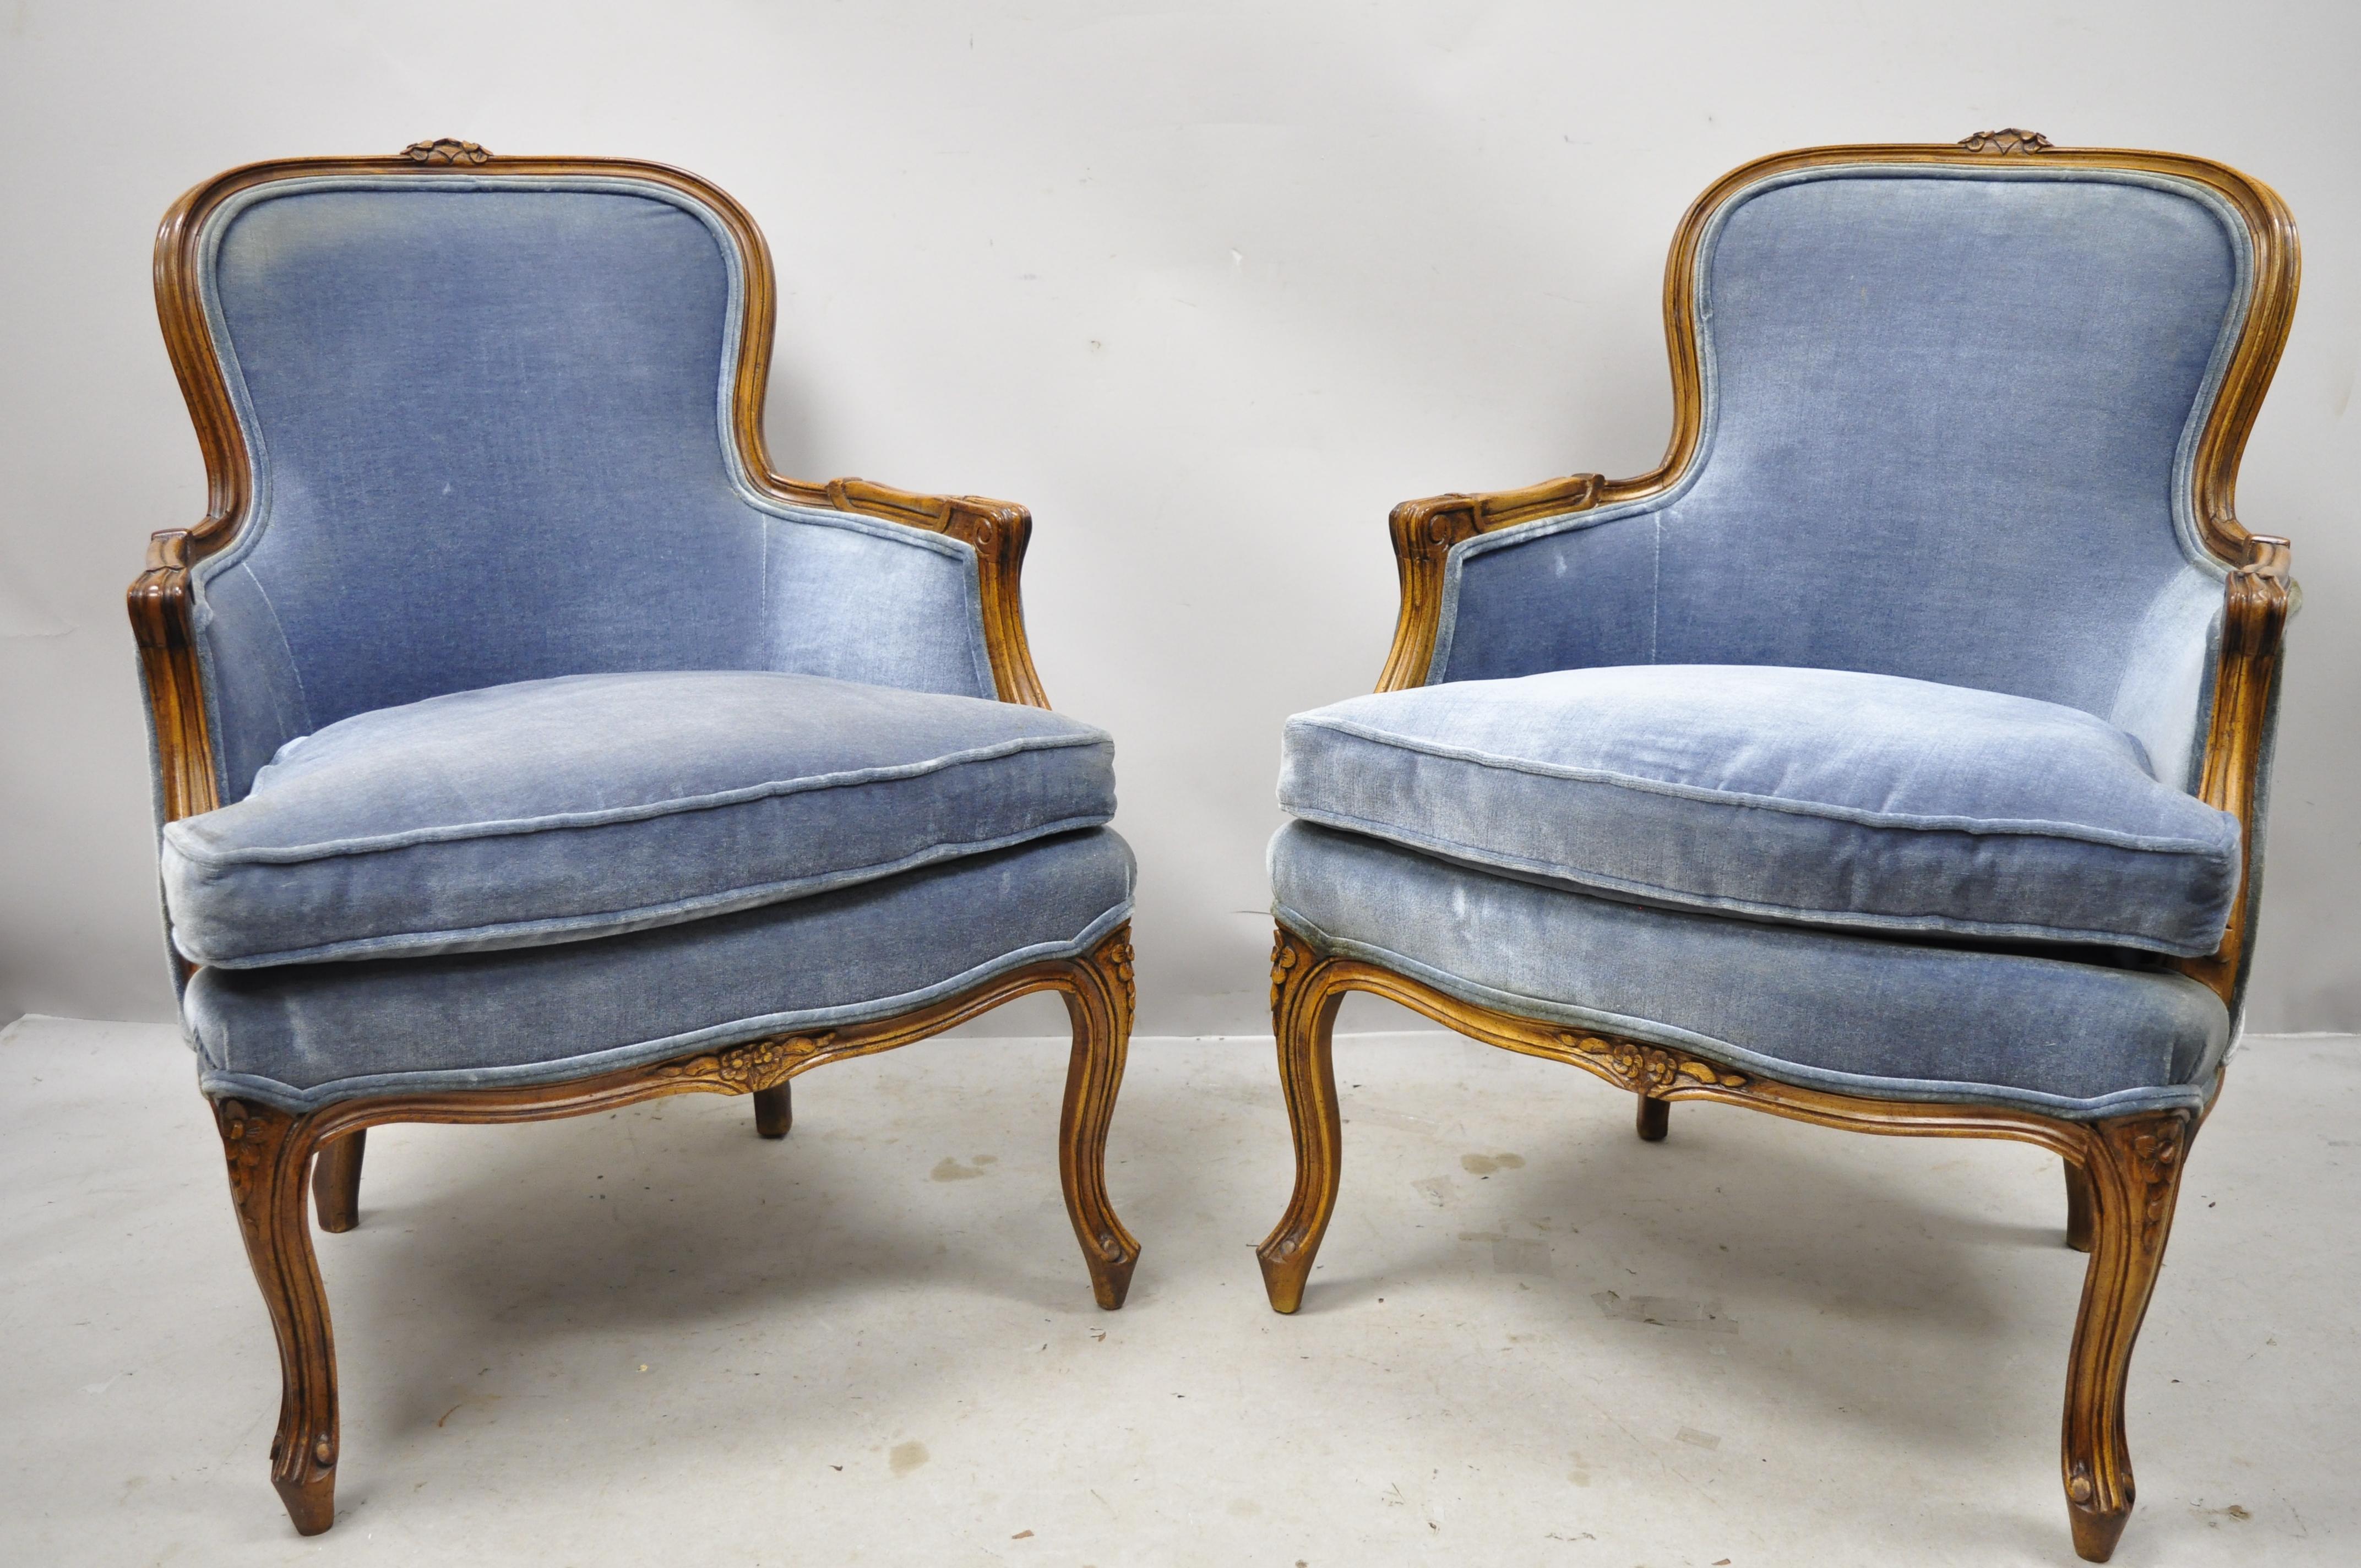 Weiman / Warren Lloyd vintage French Louis XV Provincial blue bergère lounge armchairs - a pair. Item features solid wood frames, blue upholstery, cabriole legs, original label, quality American craftsmanship, great style and form, circa mid-20th